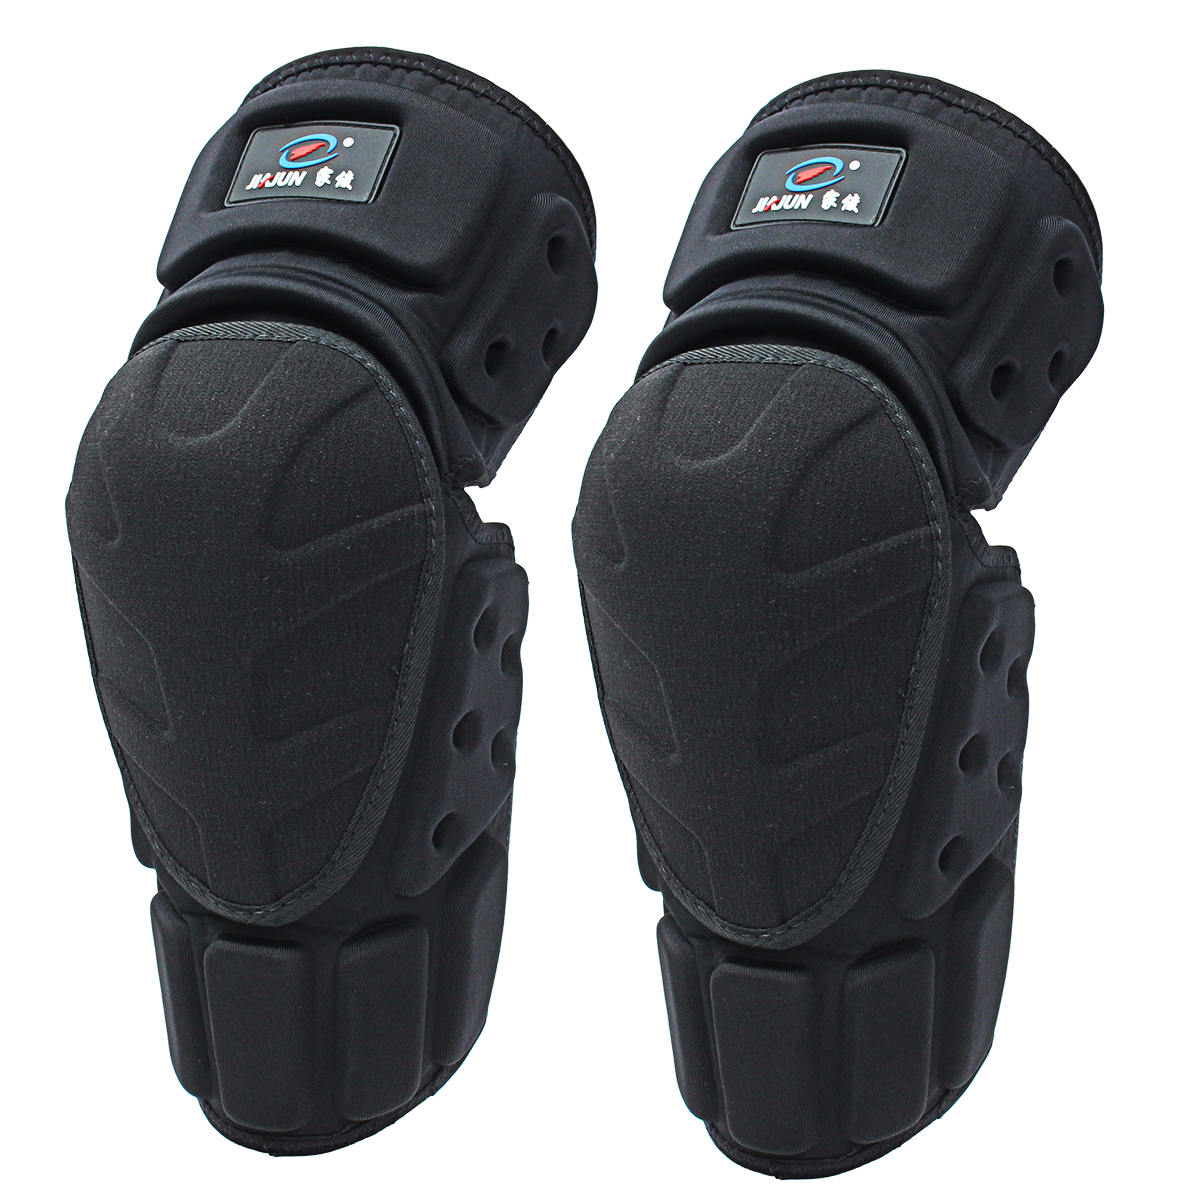 1-Pair-Outdoor-Moto-Knee-Pad-Motorcycle-Bicycle-Black-Protector-Pads-Knee-Protective-Guards-1281422-1